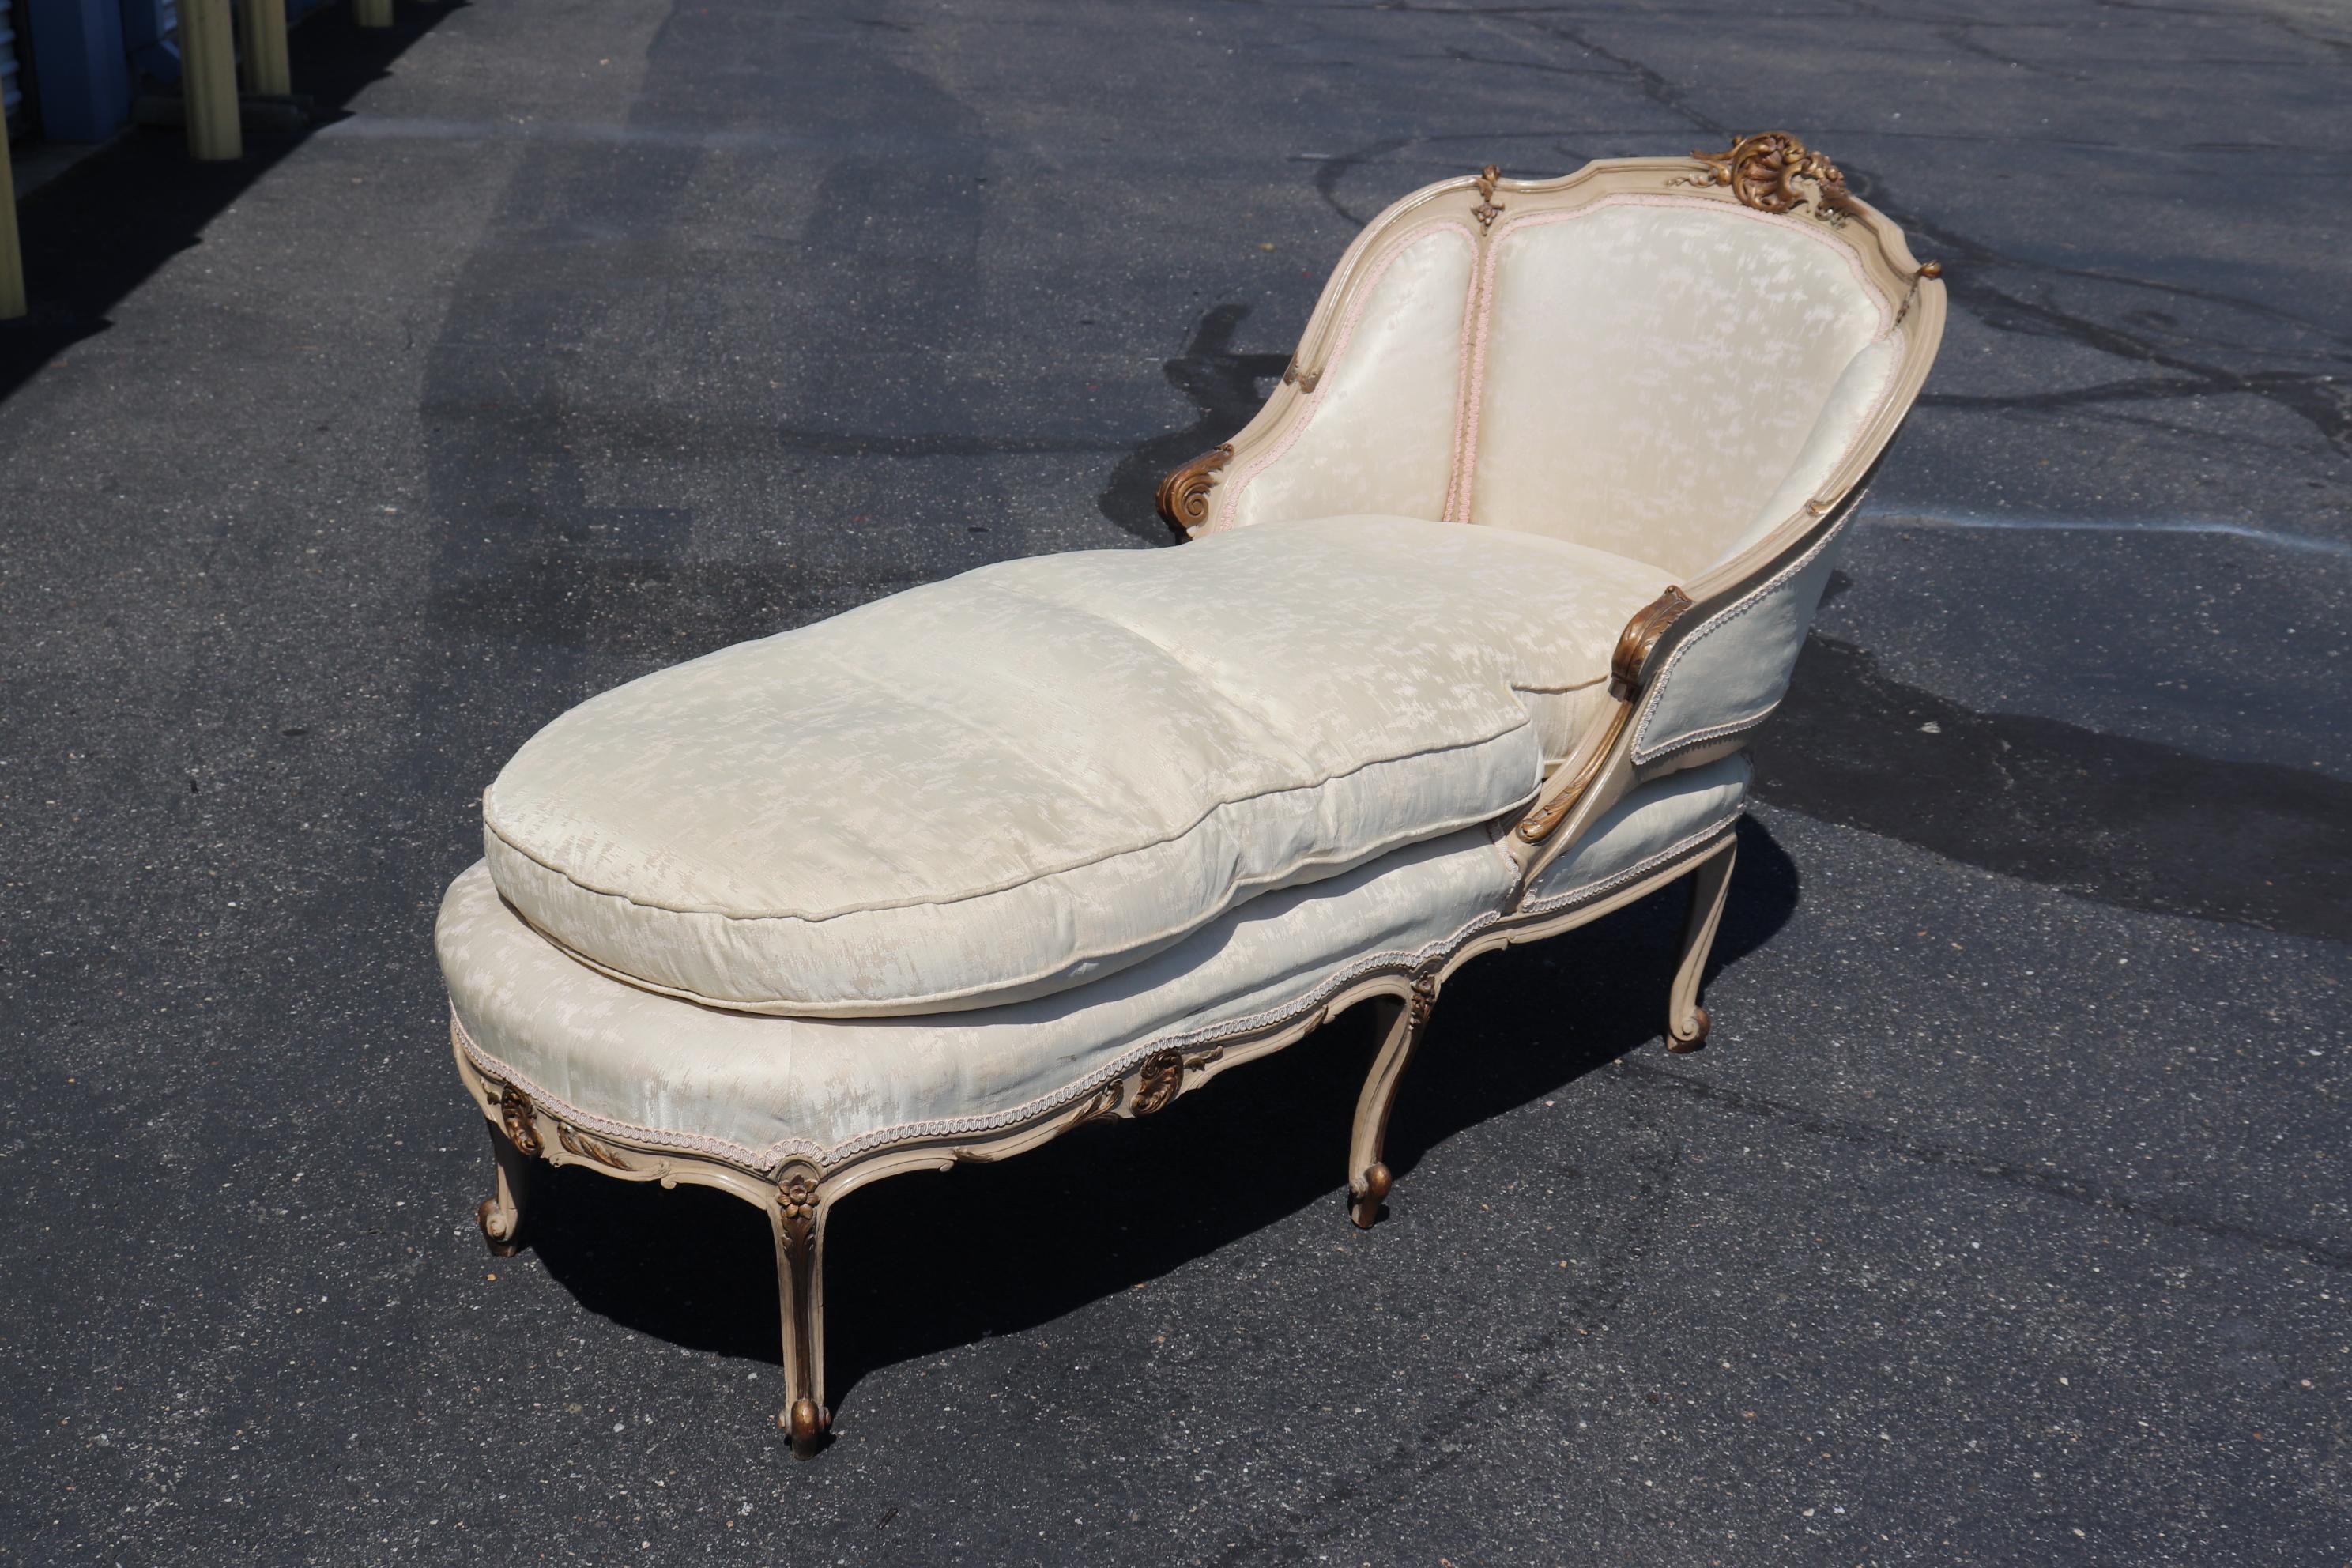 This is a gorgeous chaise measuring 63 wide x 29 deep x 37 tall and the seat height is 19 inches. The piece has gold accents on a off- white frame.